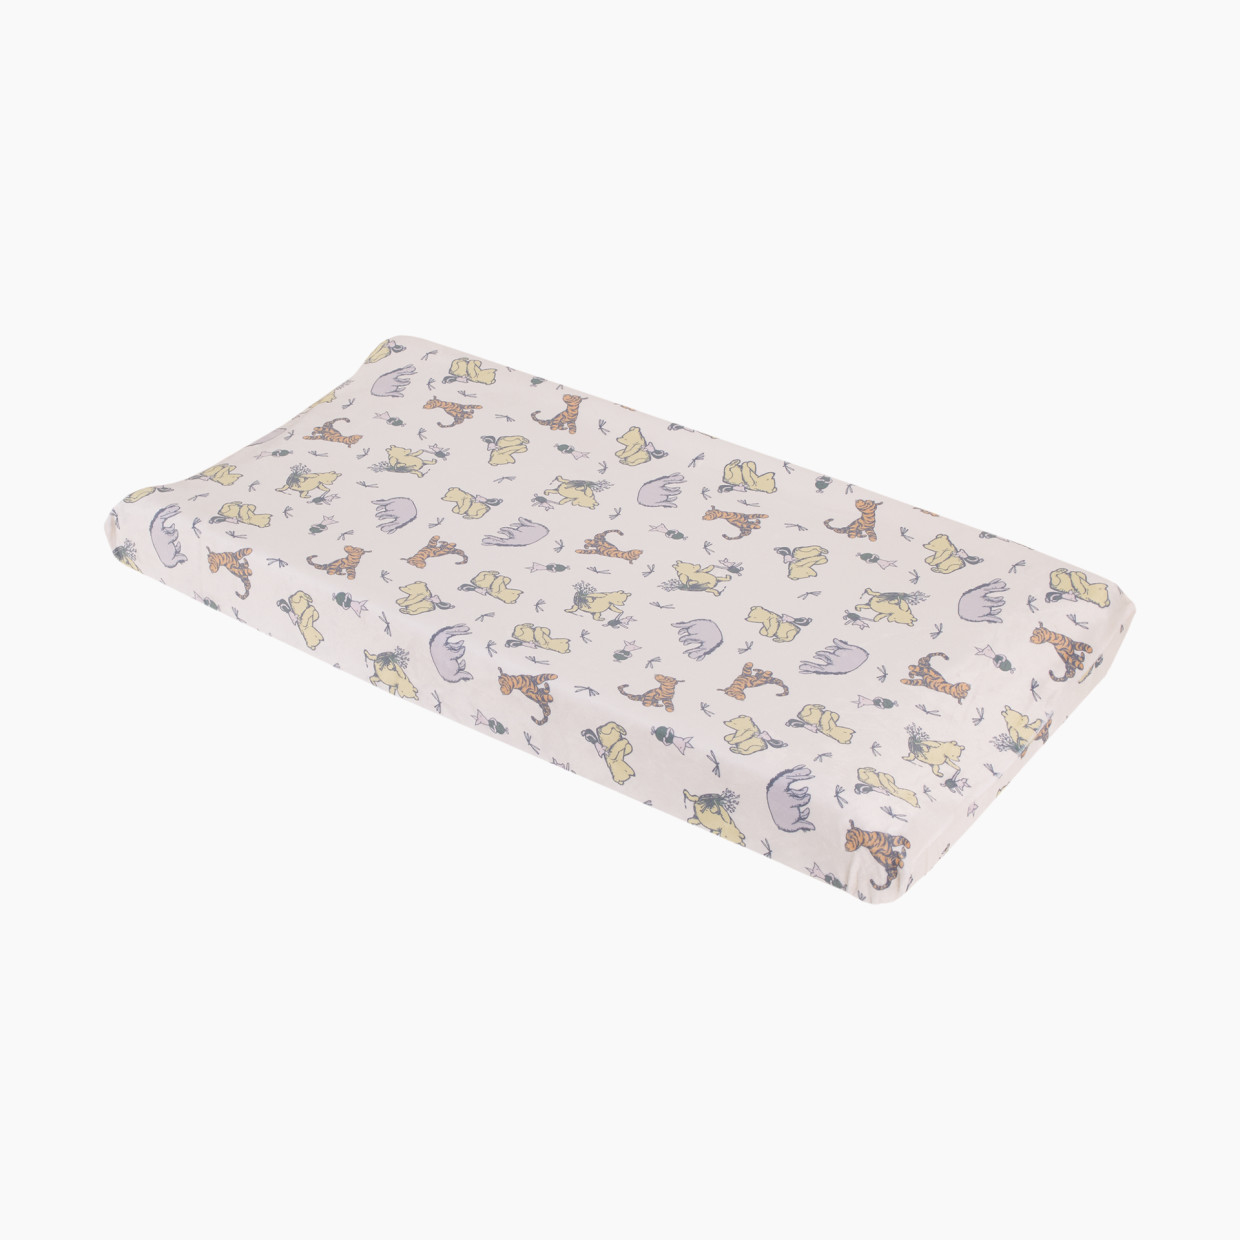 NoJo Baby Printed Changing Pad Cover - Classic Pooh Naturally Friends.